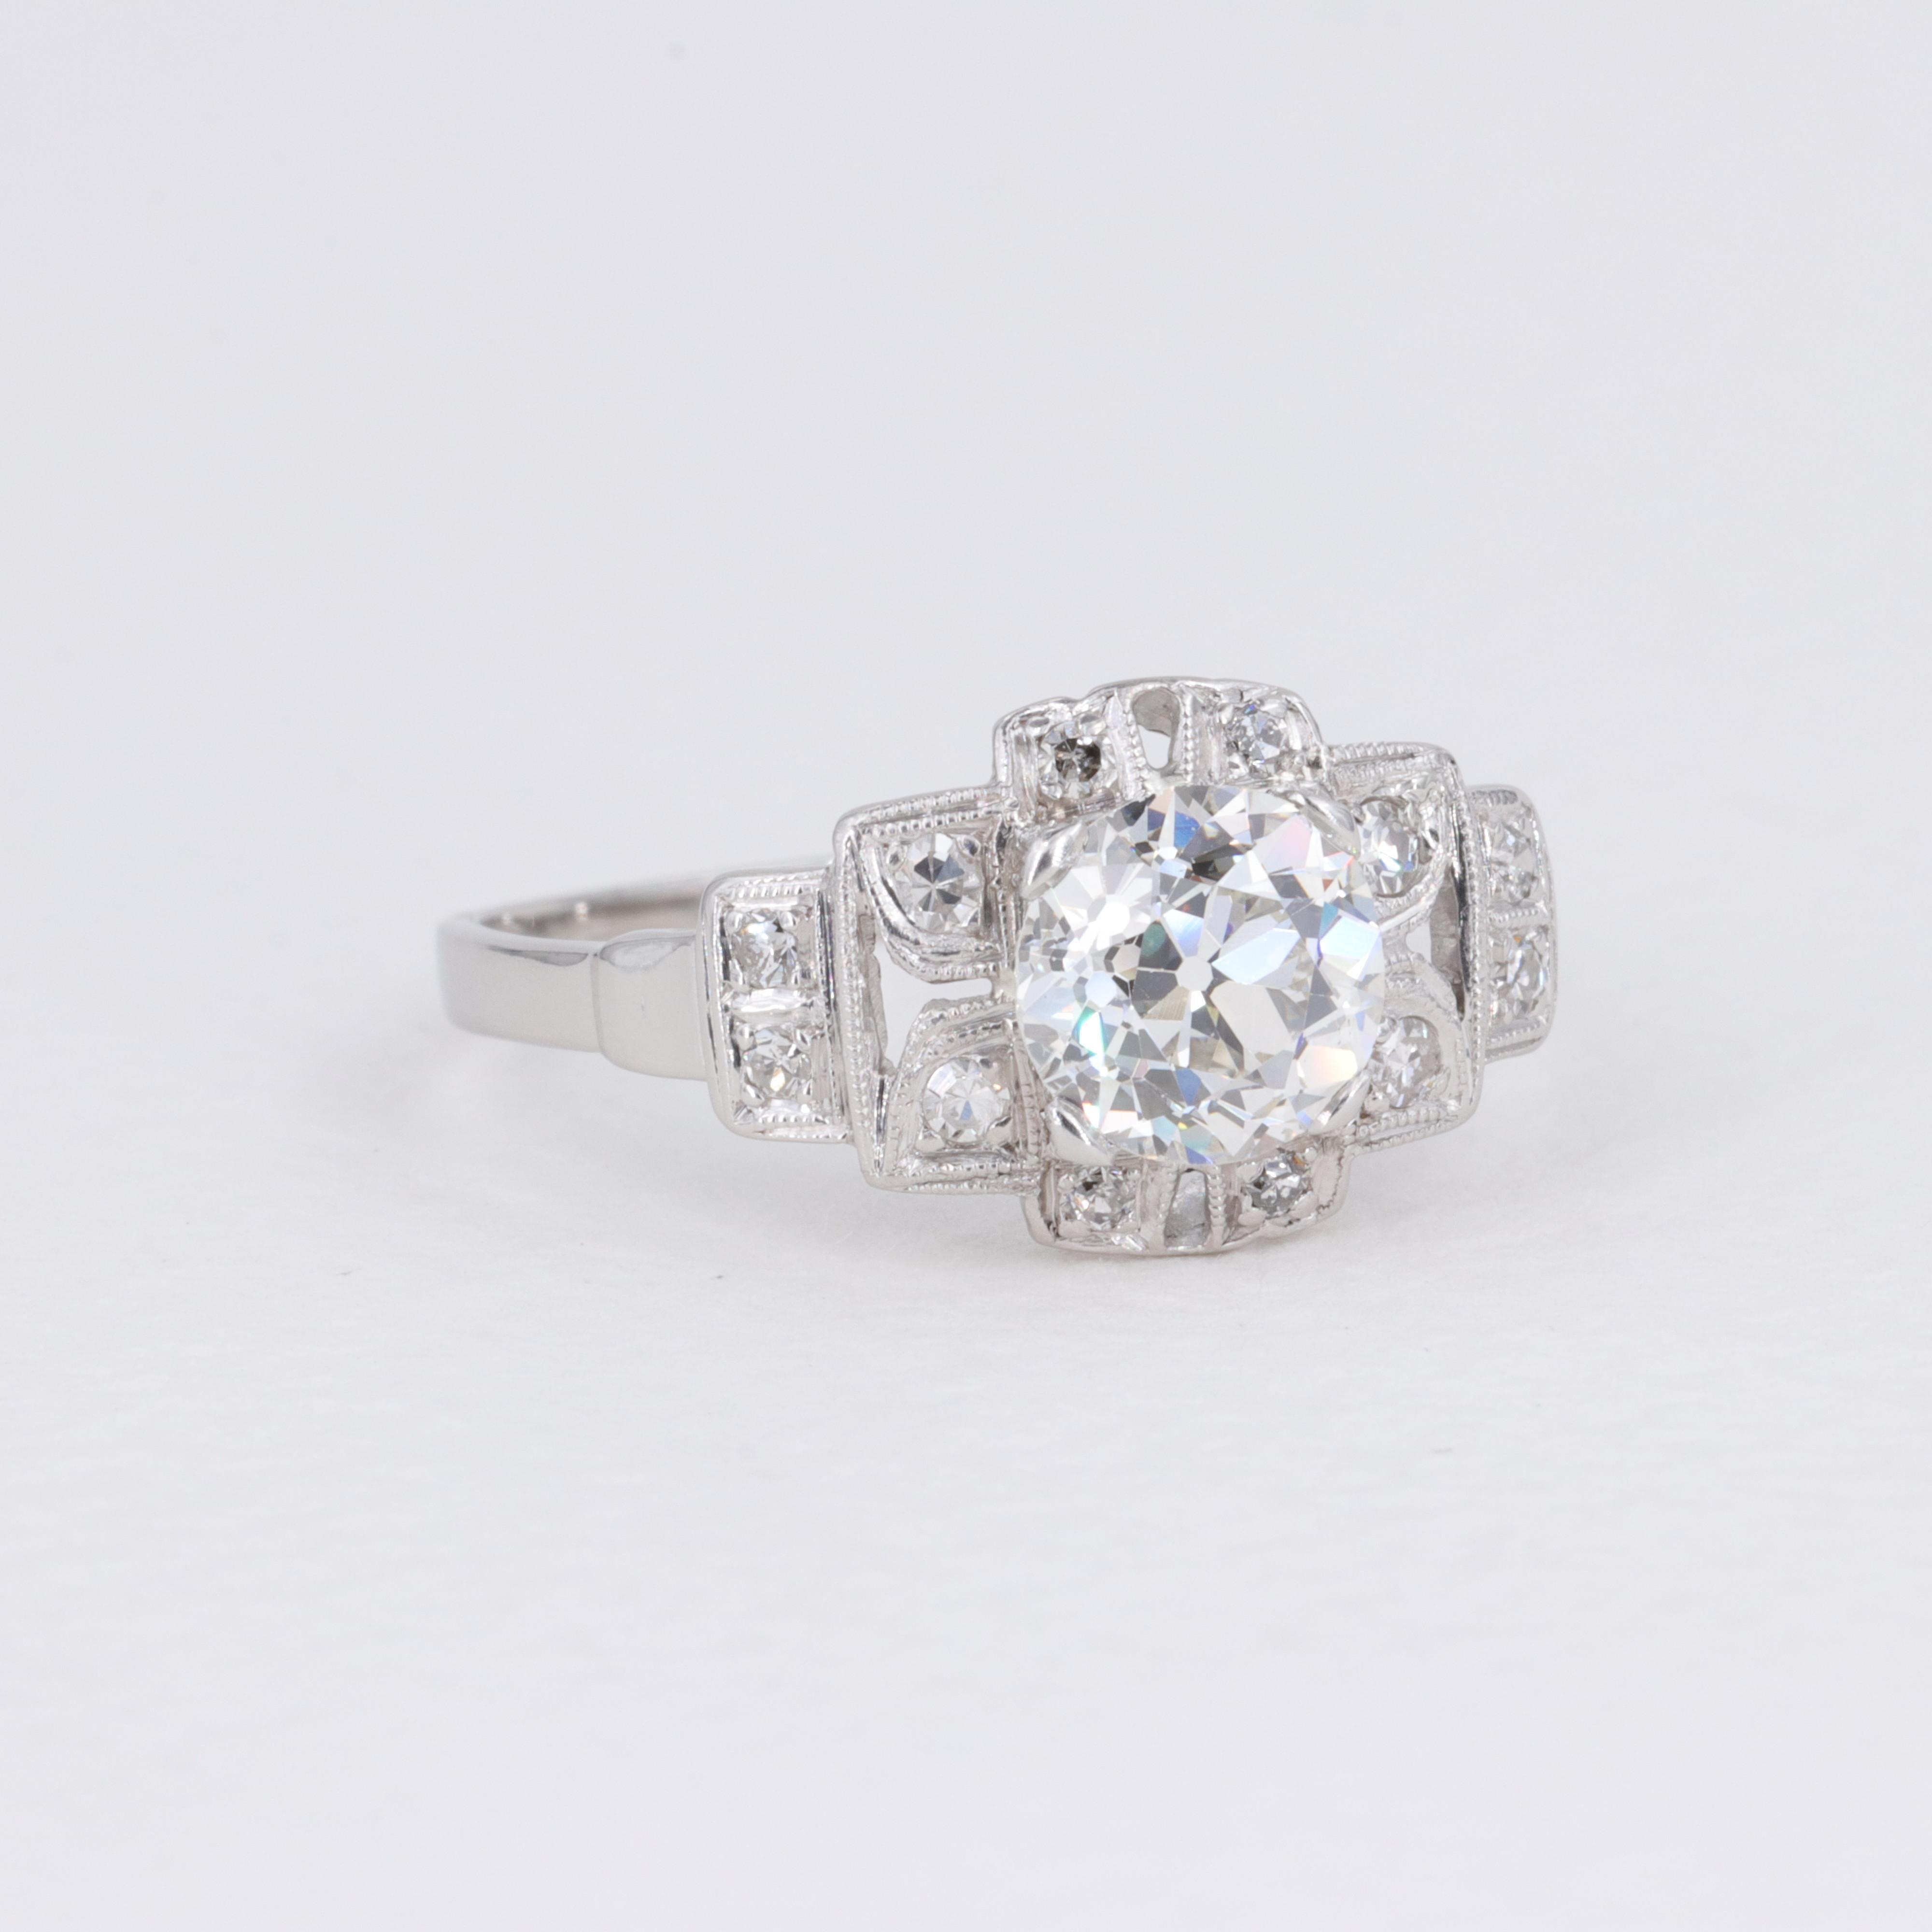 G.I.A. 1.14ct Old European Cut Diamond Antique Deco Platinum Engagement Ring In Good Condition For Sale In Tampa, FL